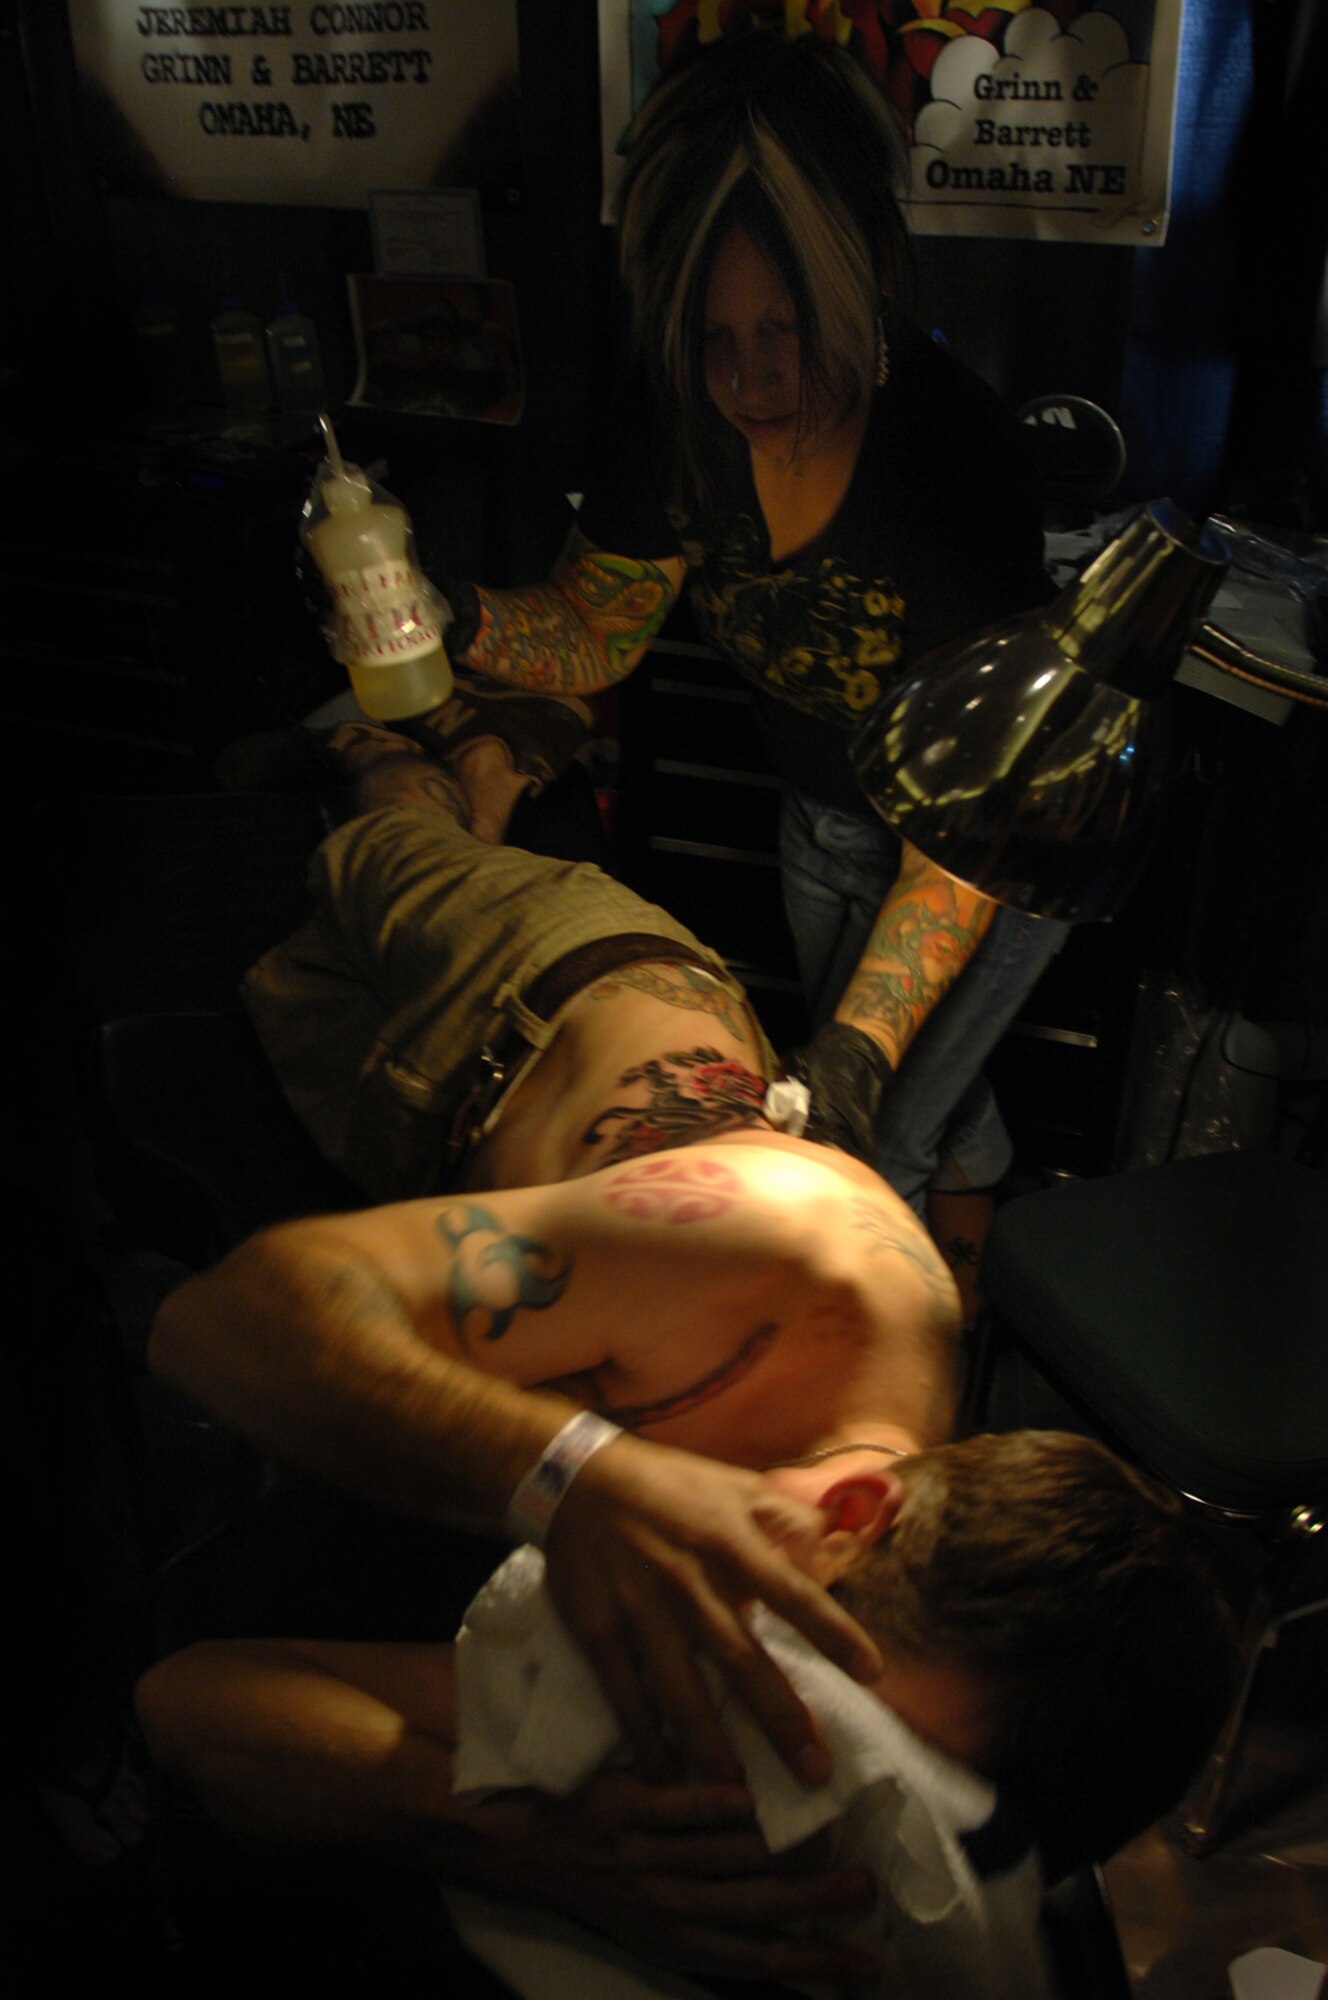 KANSAS CITY, Mo. - Jen Beirola, prior U.S. Air Force enlisted, prepares to irrigate a fresh tattoo after putting the finishing touches on it at an annual tattoo convention July 19. Jen discovered her talent while serving in the Air Force and was inspired by the late graphic artist career field. Military members stationed at Whiteman were able to attend the convention and watch tattoo arts such as Jen perform their craft. (U.S. Air Force photo/Senior Airman Kenny Holston)